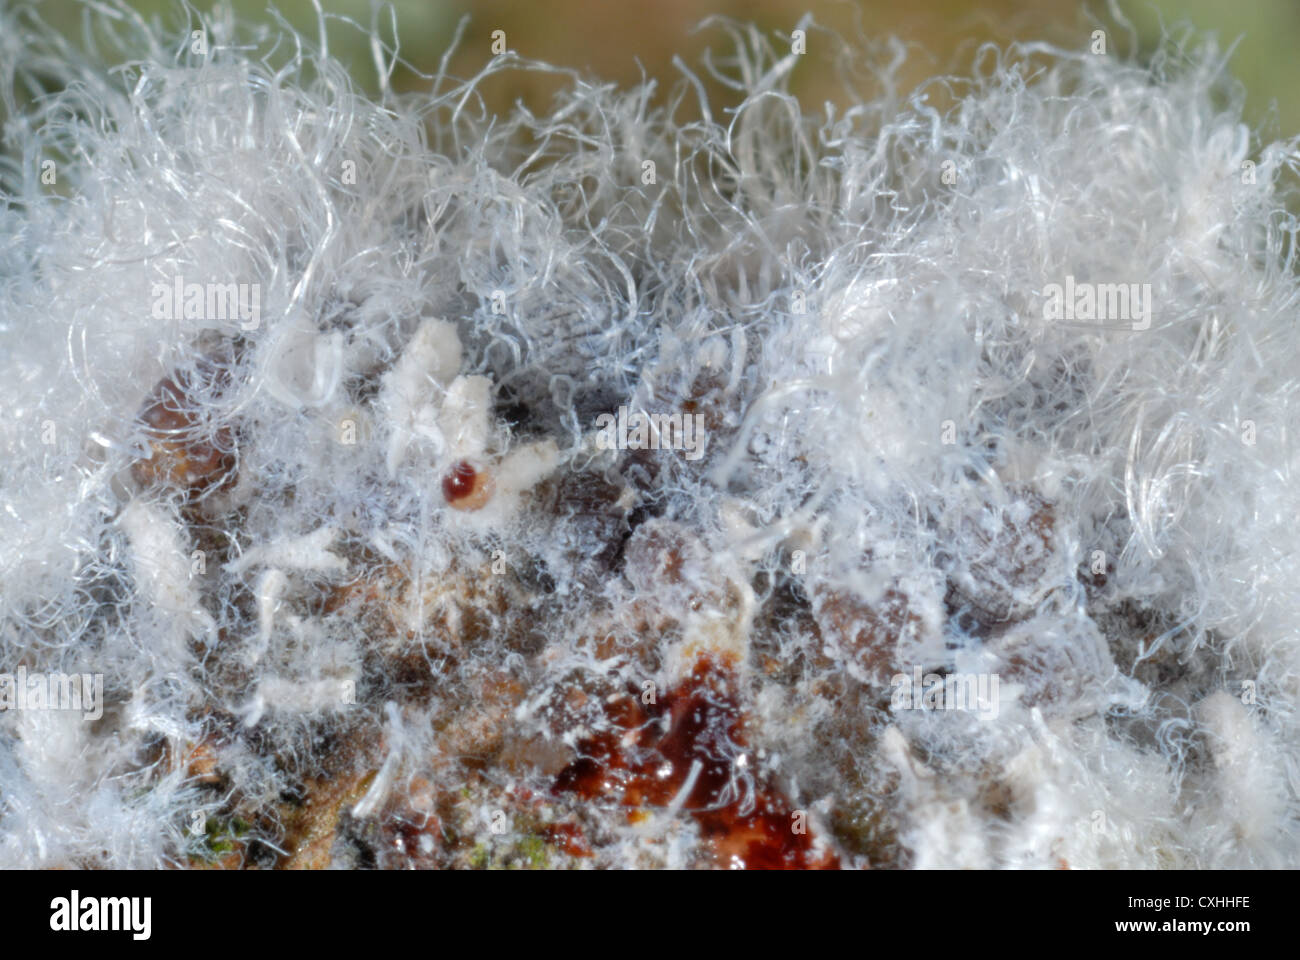 Woolly aphid Eriosoma lanigerum waxy extrusions and aphids on apple wood Stock Photo